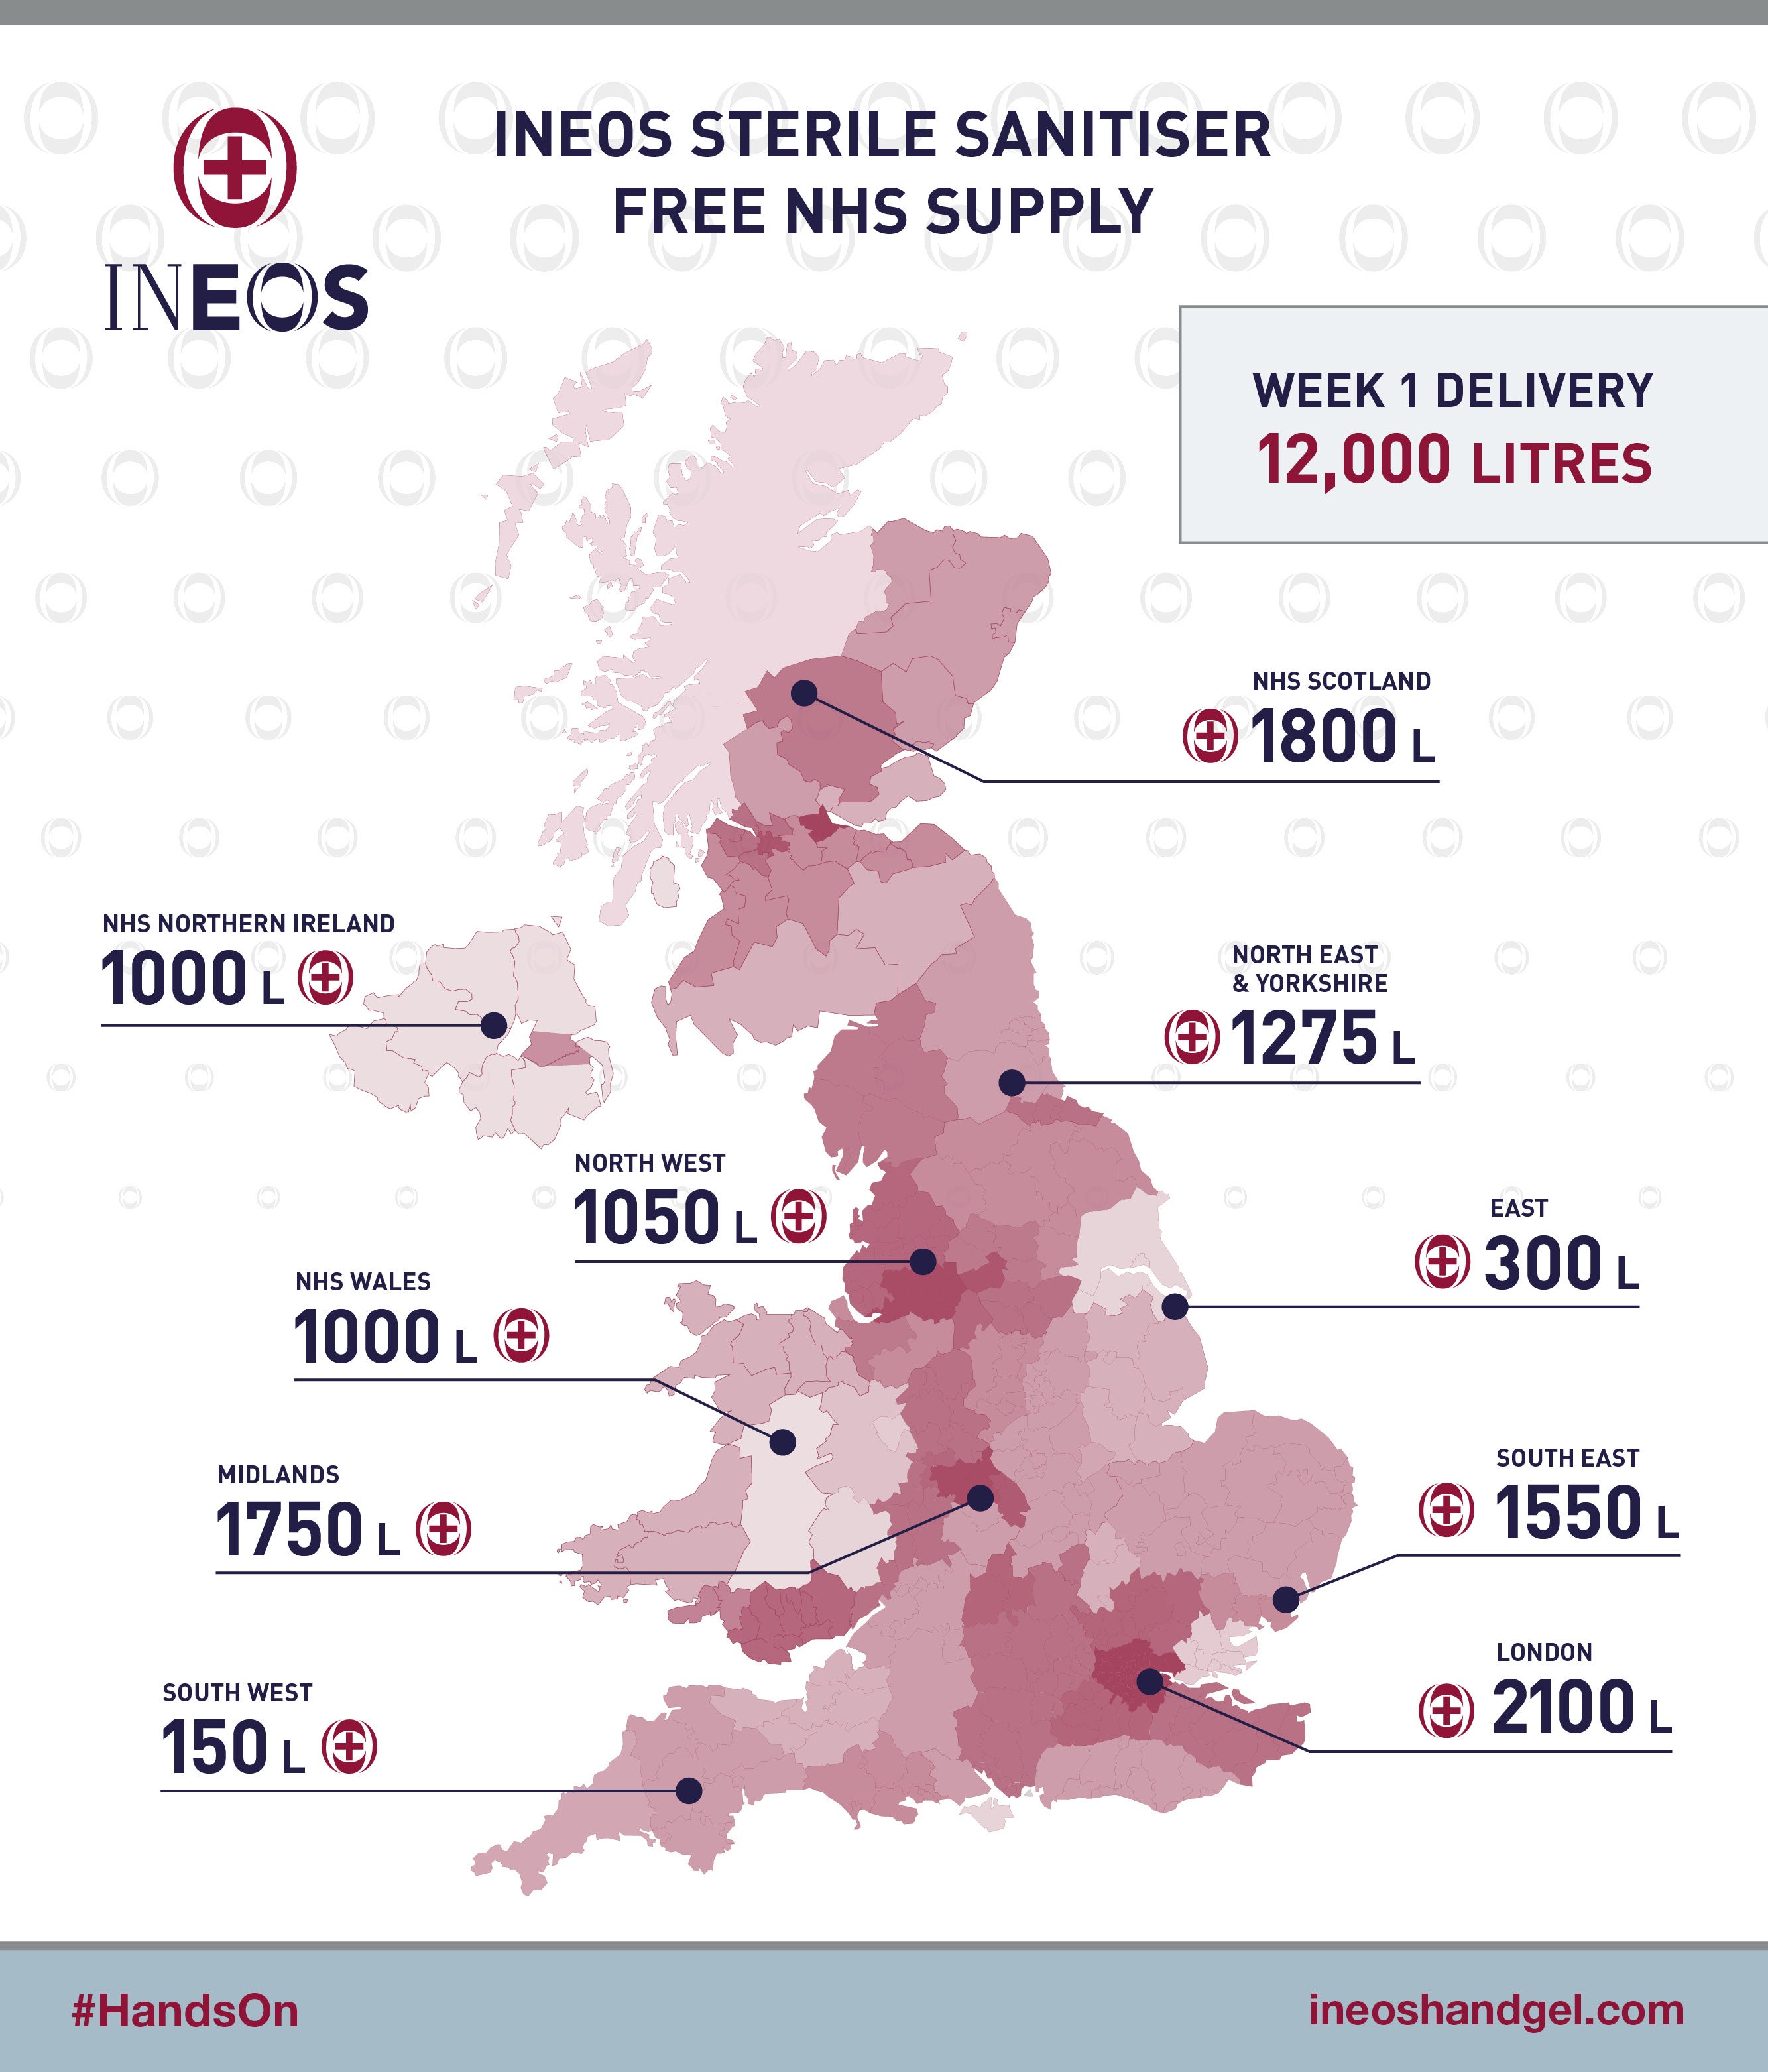 a map of the uk in maroon showing ineos hygienics supply plan for the nhs